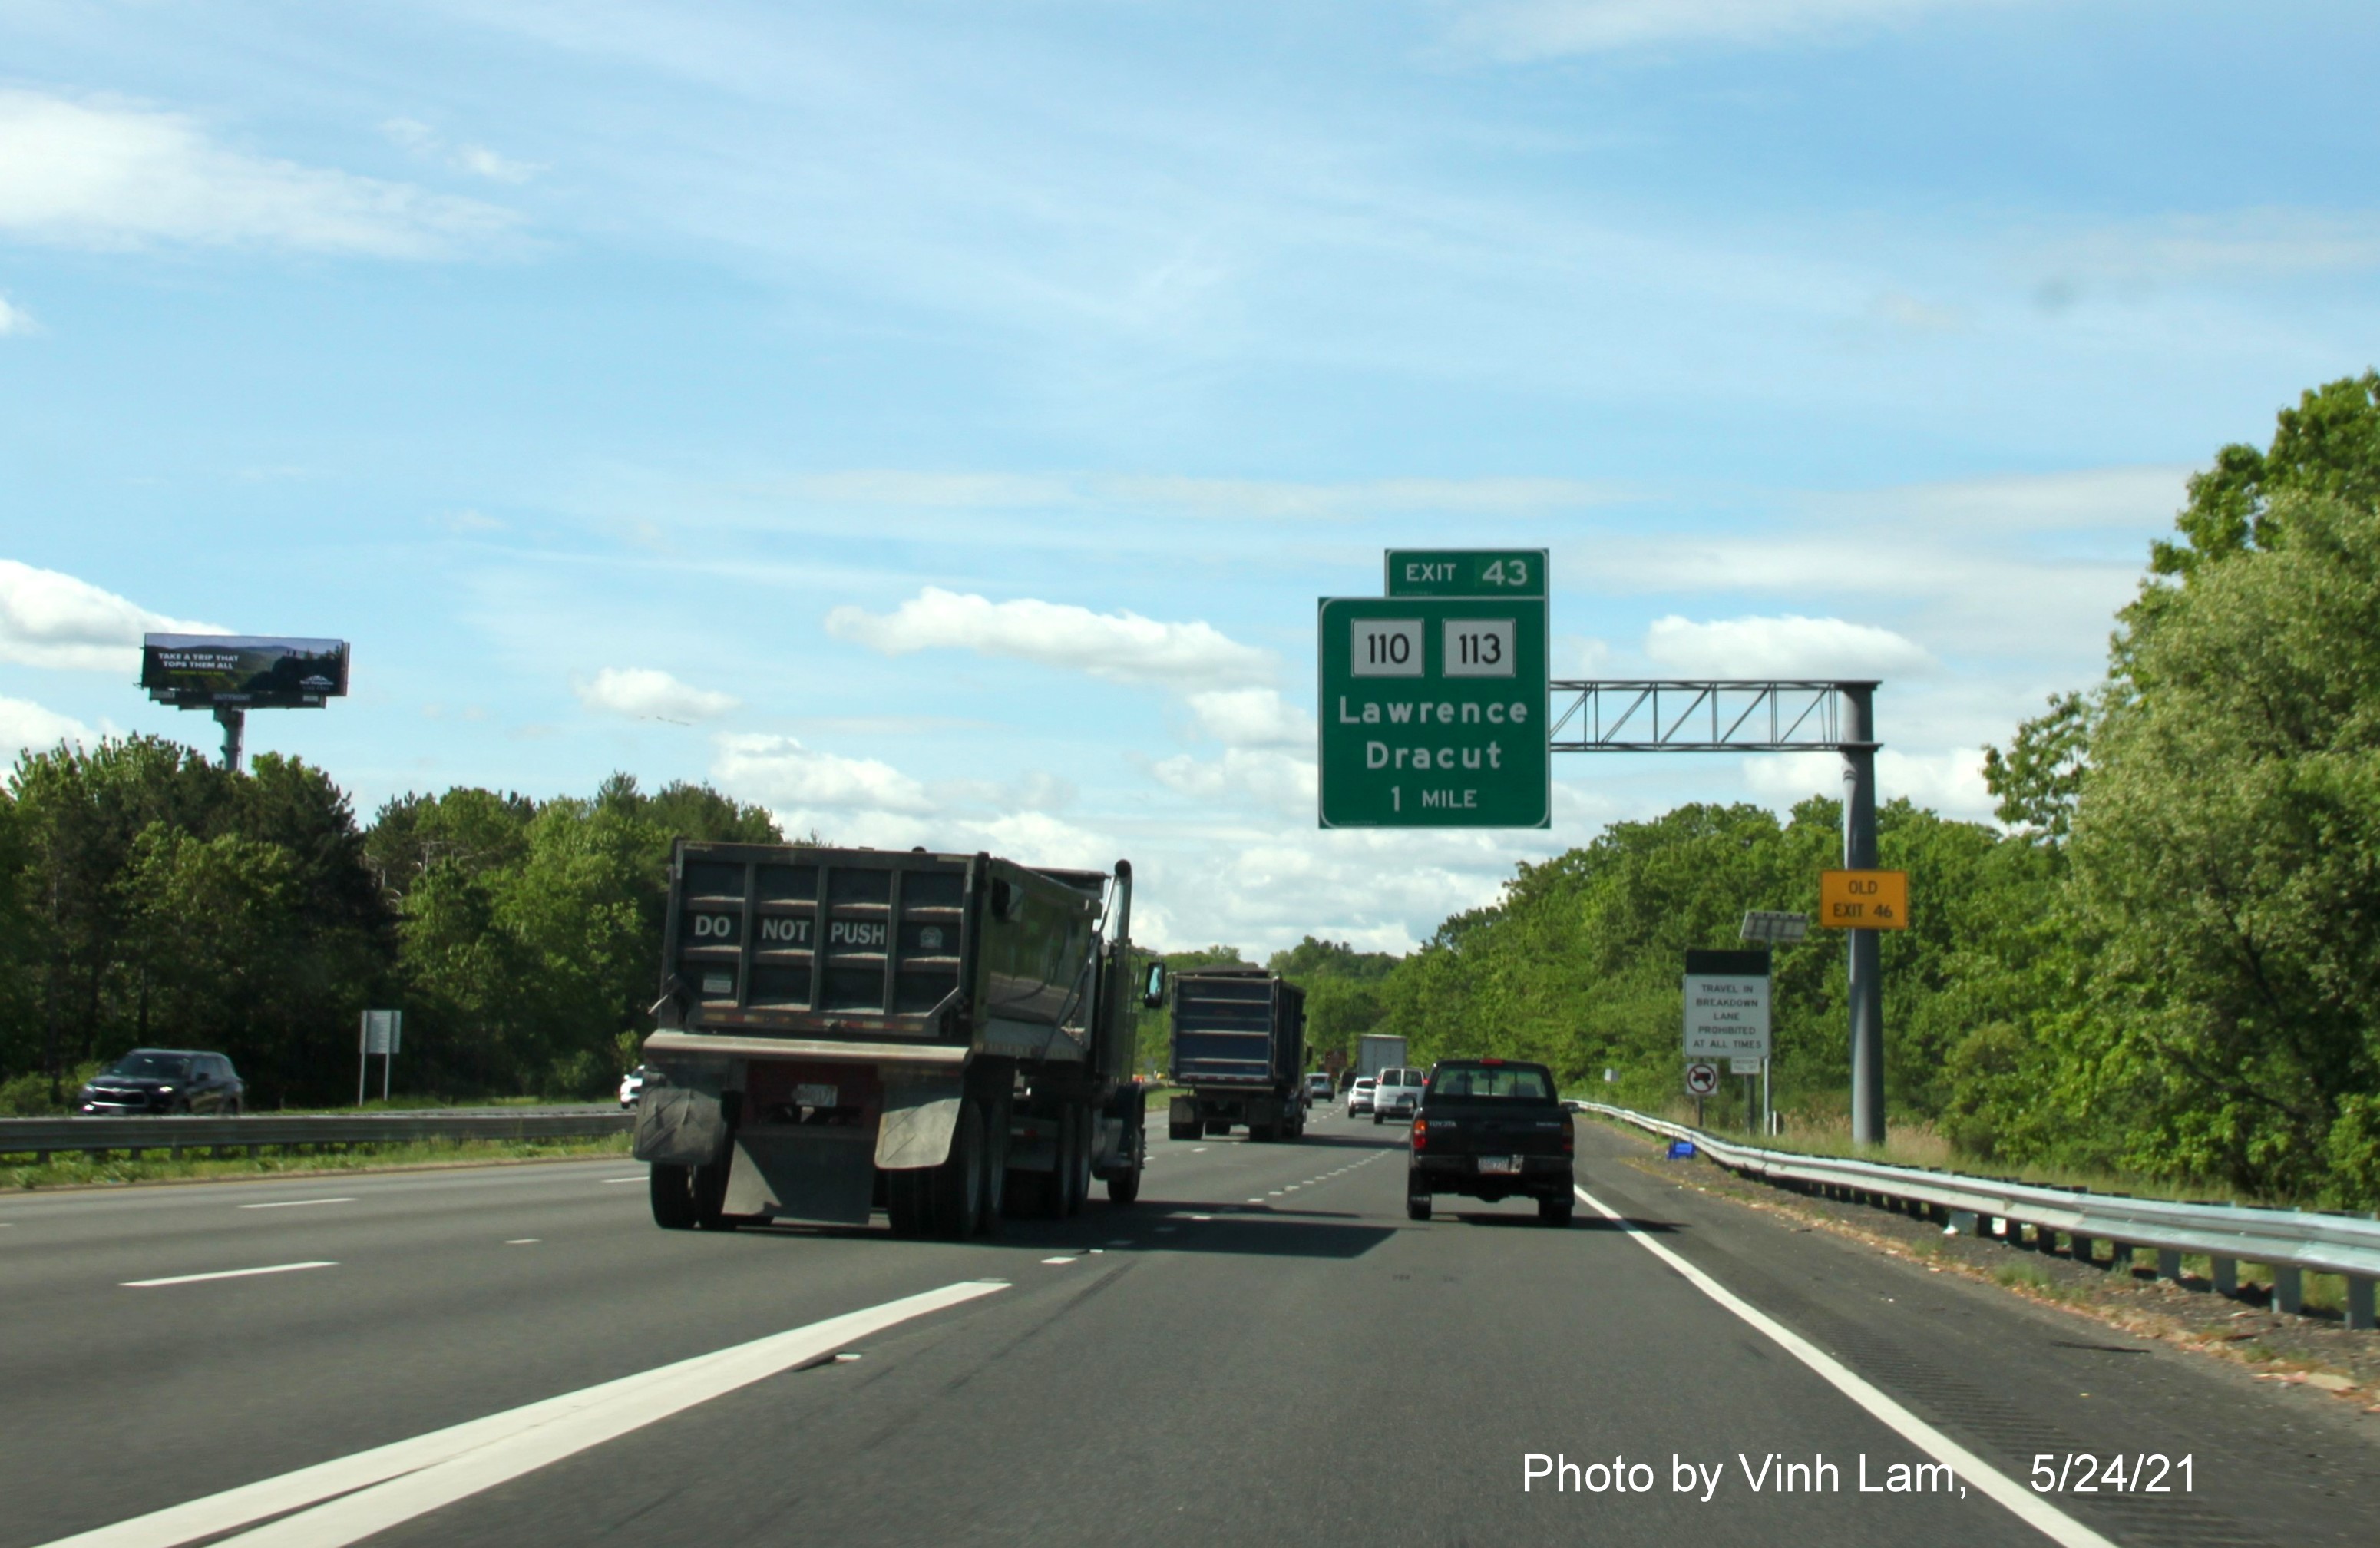 Image of 1 mile advance overhead sign for MA 110/113 exit with new milepost based exit number and yellow Old Exit 45 advisory sign on support on I-93 South in Andover, by Vinh Lam, May 2021